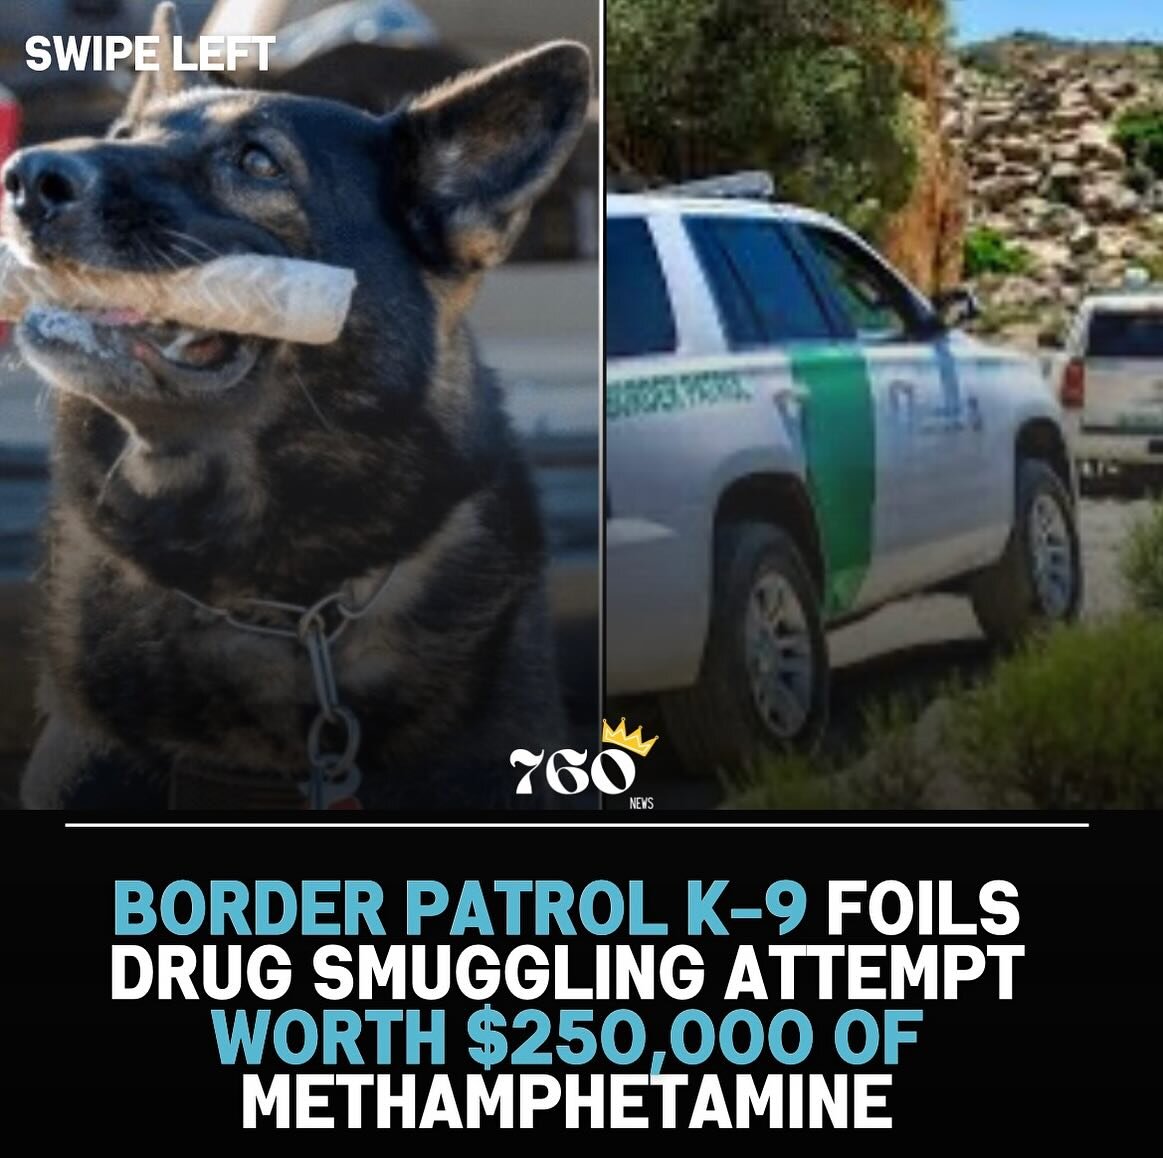 For the full story, please view my story or copy and paste the link below

Full story: https://www.760news.org/local-news/border-patrol-k-9-foils-drug-smuggling-attempt-worth-250000-of-methamphetamine

#BorderPatrol #DrugBust #LawEnforcement #K9Unit 